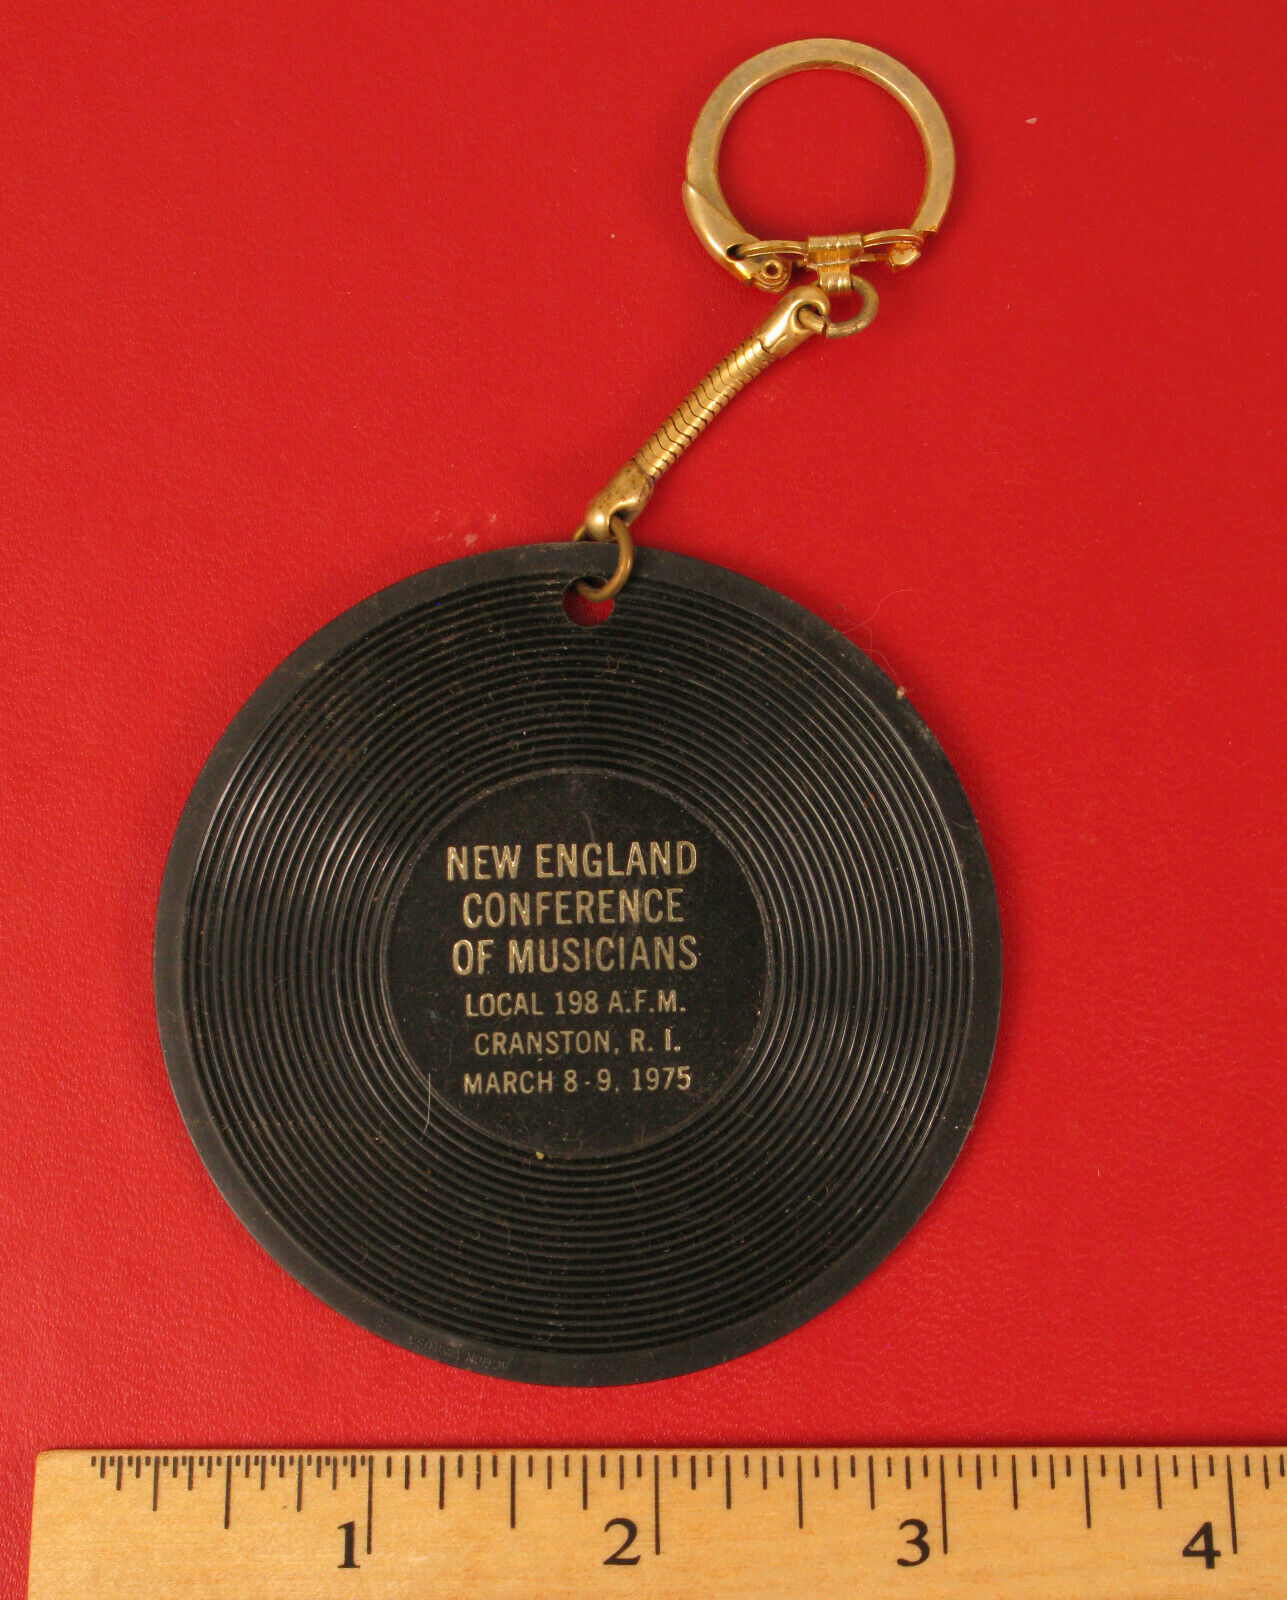 VINTAGE 1975 NEW ENGLAND CONFERENCE OF MUSICIANS RECORD ALBUM KEY CHAIN RARE 